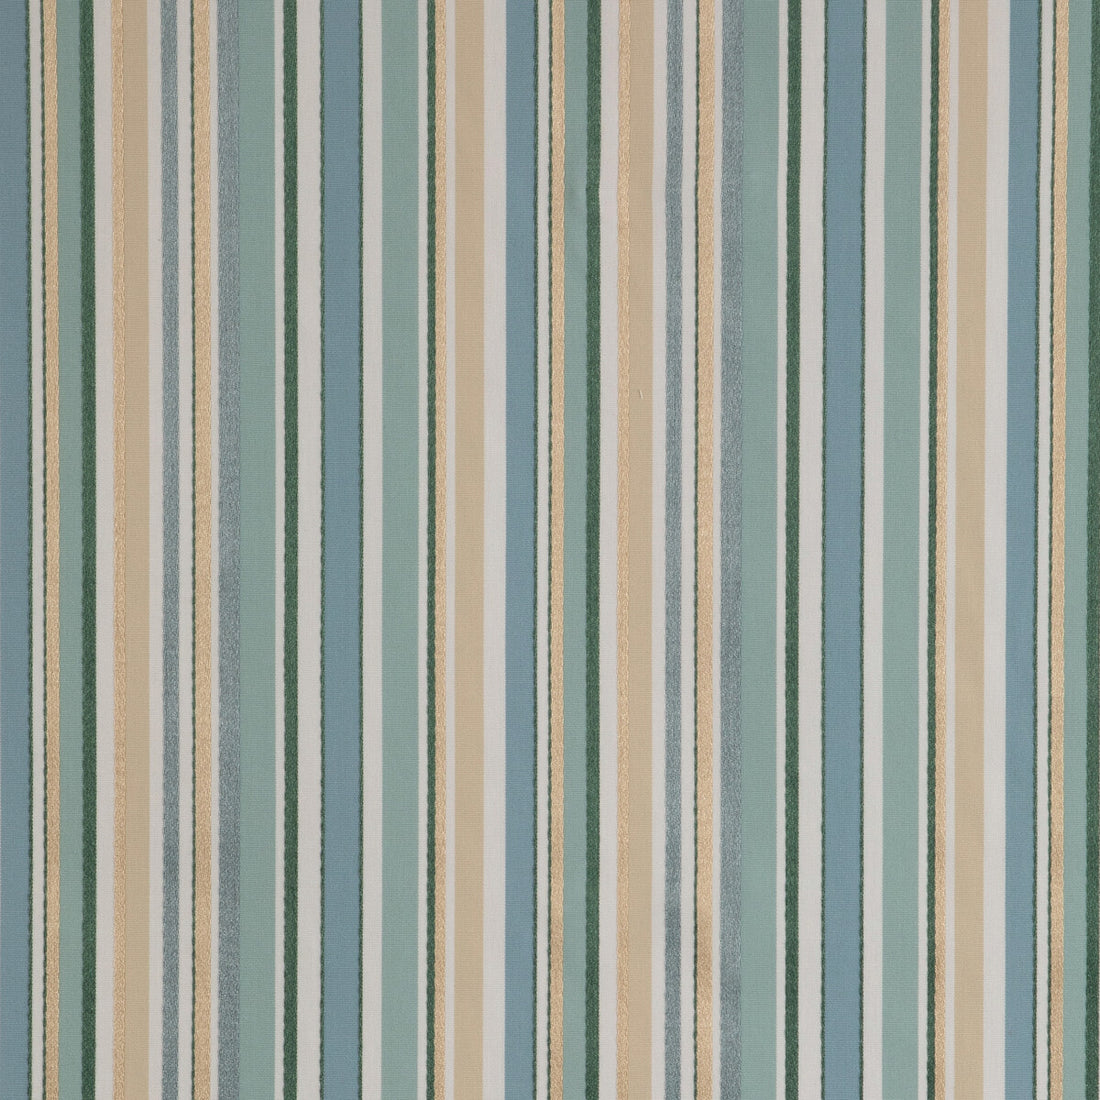 Siders Stripe fabric in aqua/sand color - pattern 2023103.1613.0 - by Lee Jofa in the Highfield Stripes And Plaids collection